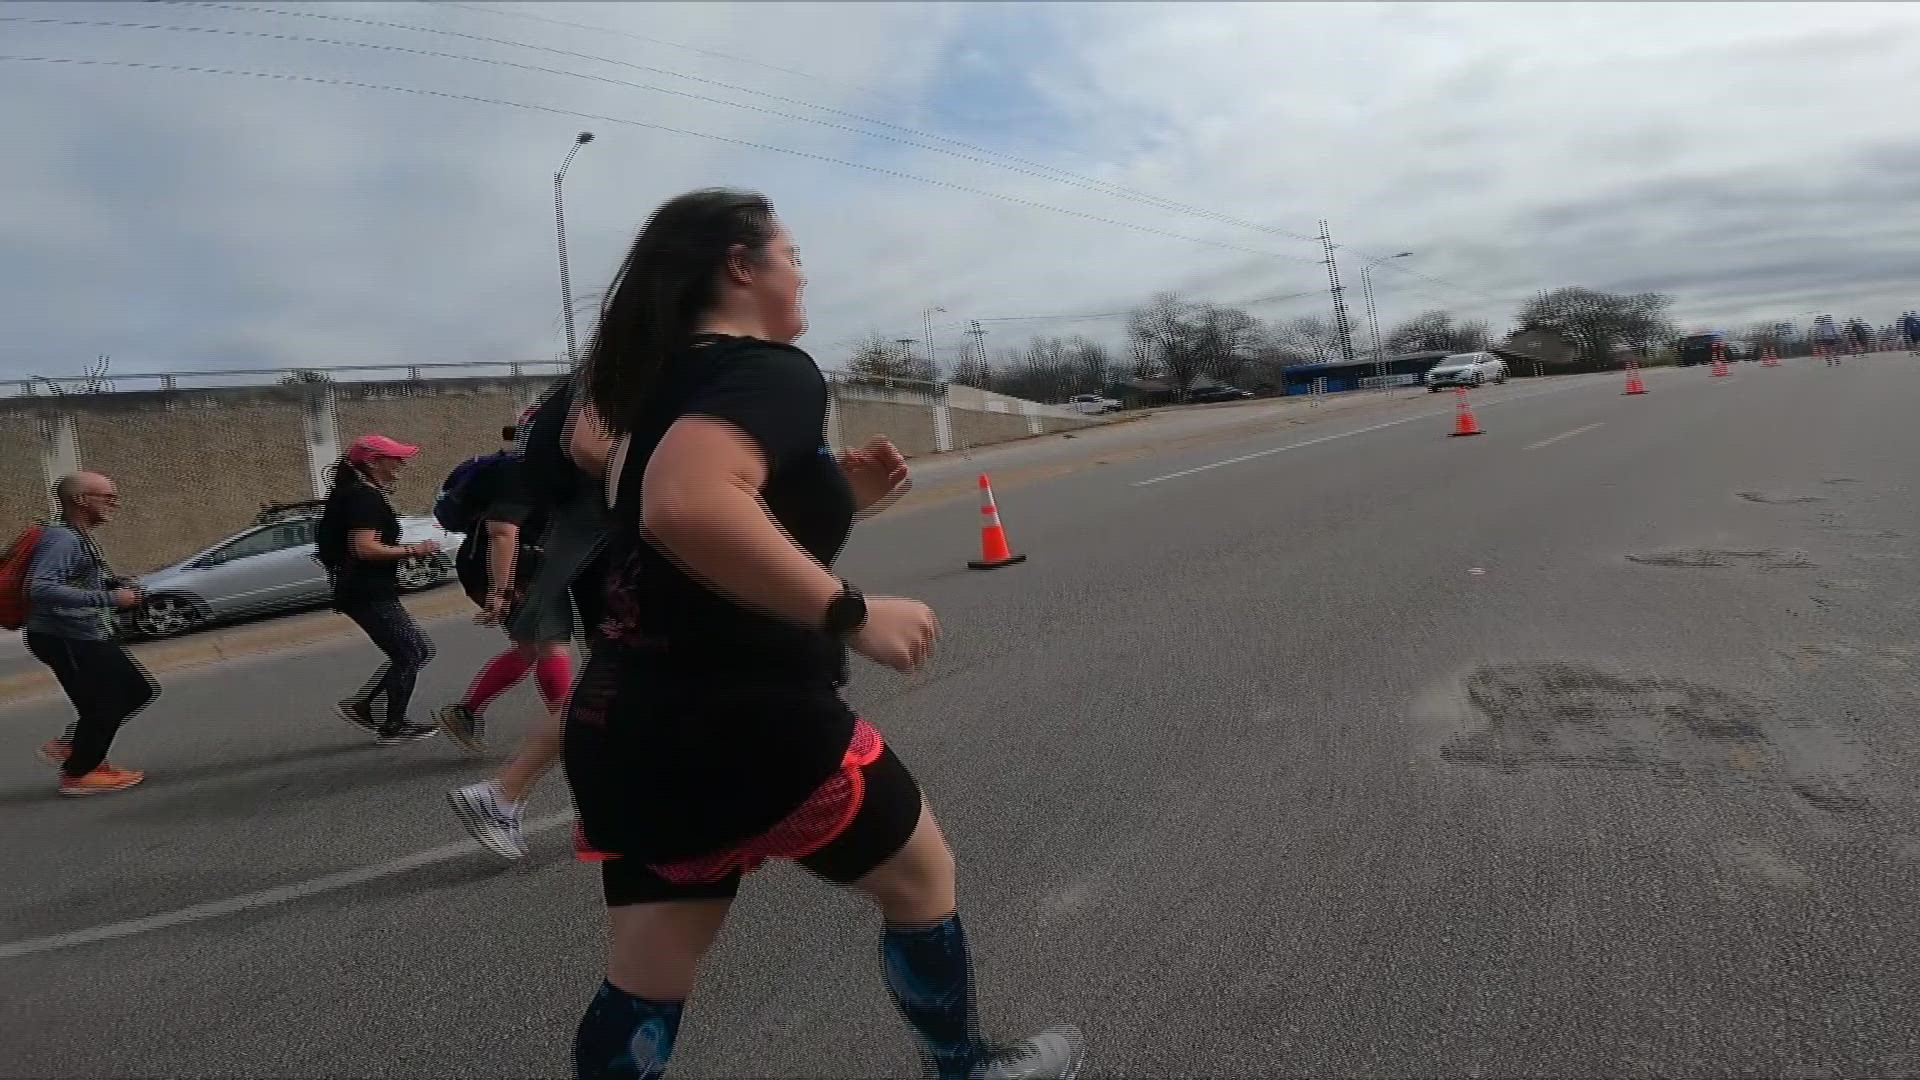 Kayleigh Williamson becomes the first person with Down syndrome to finish the Austin Marathon.